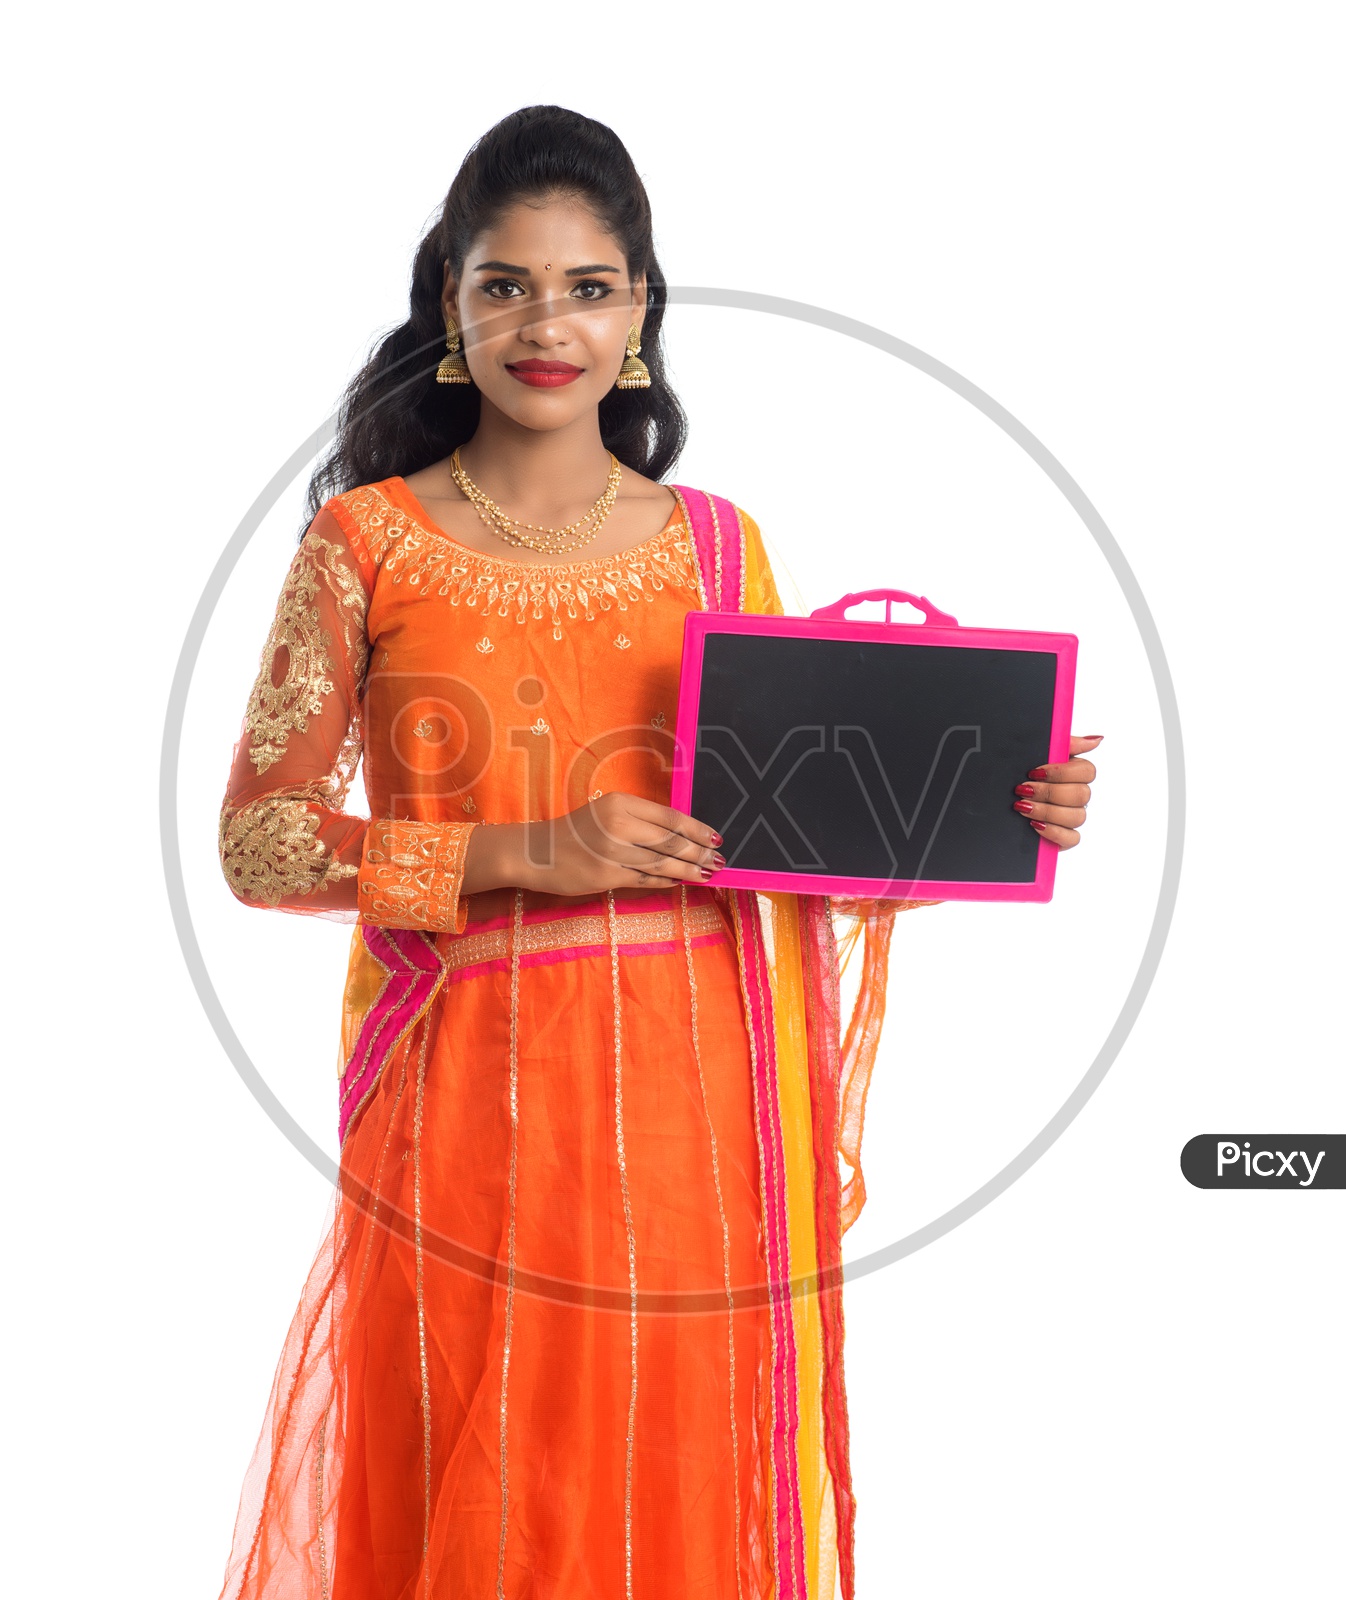 A Young traditional Indian Girl Holding a Blank Slate Board  And Showing The Space With Smile Face On an Isolated White Background